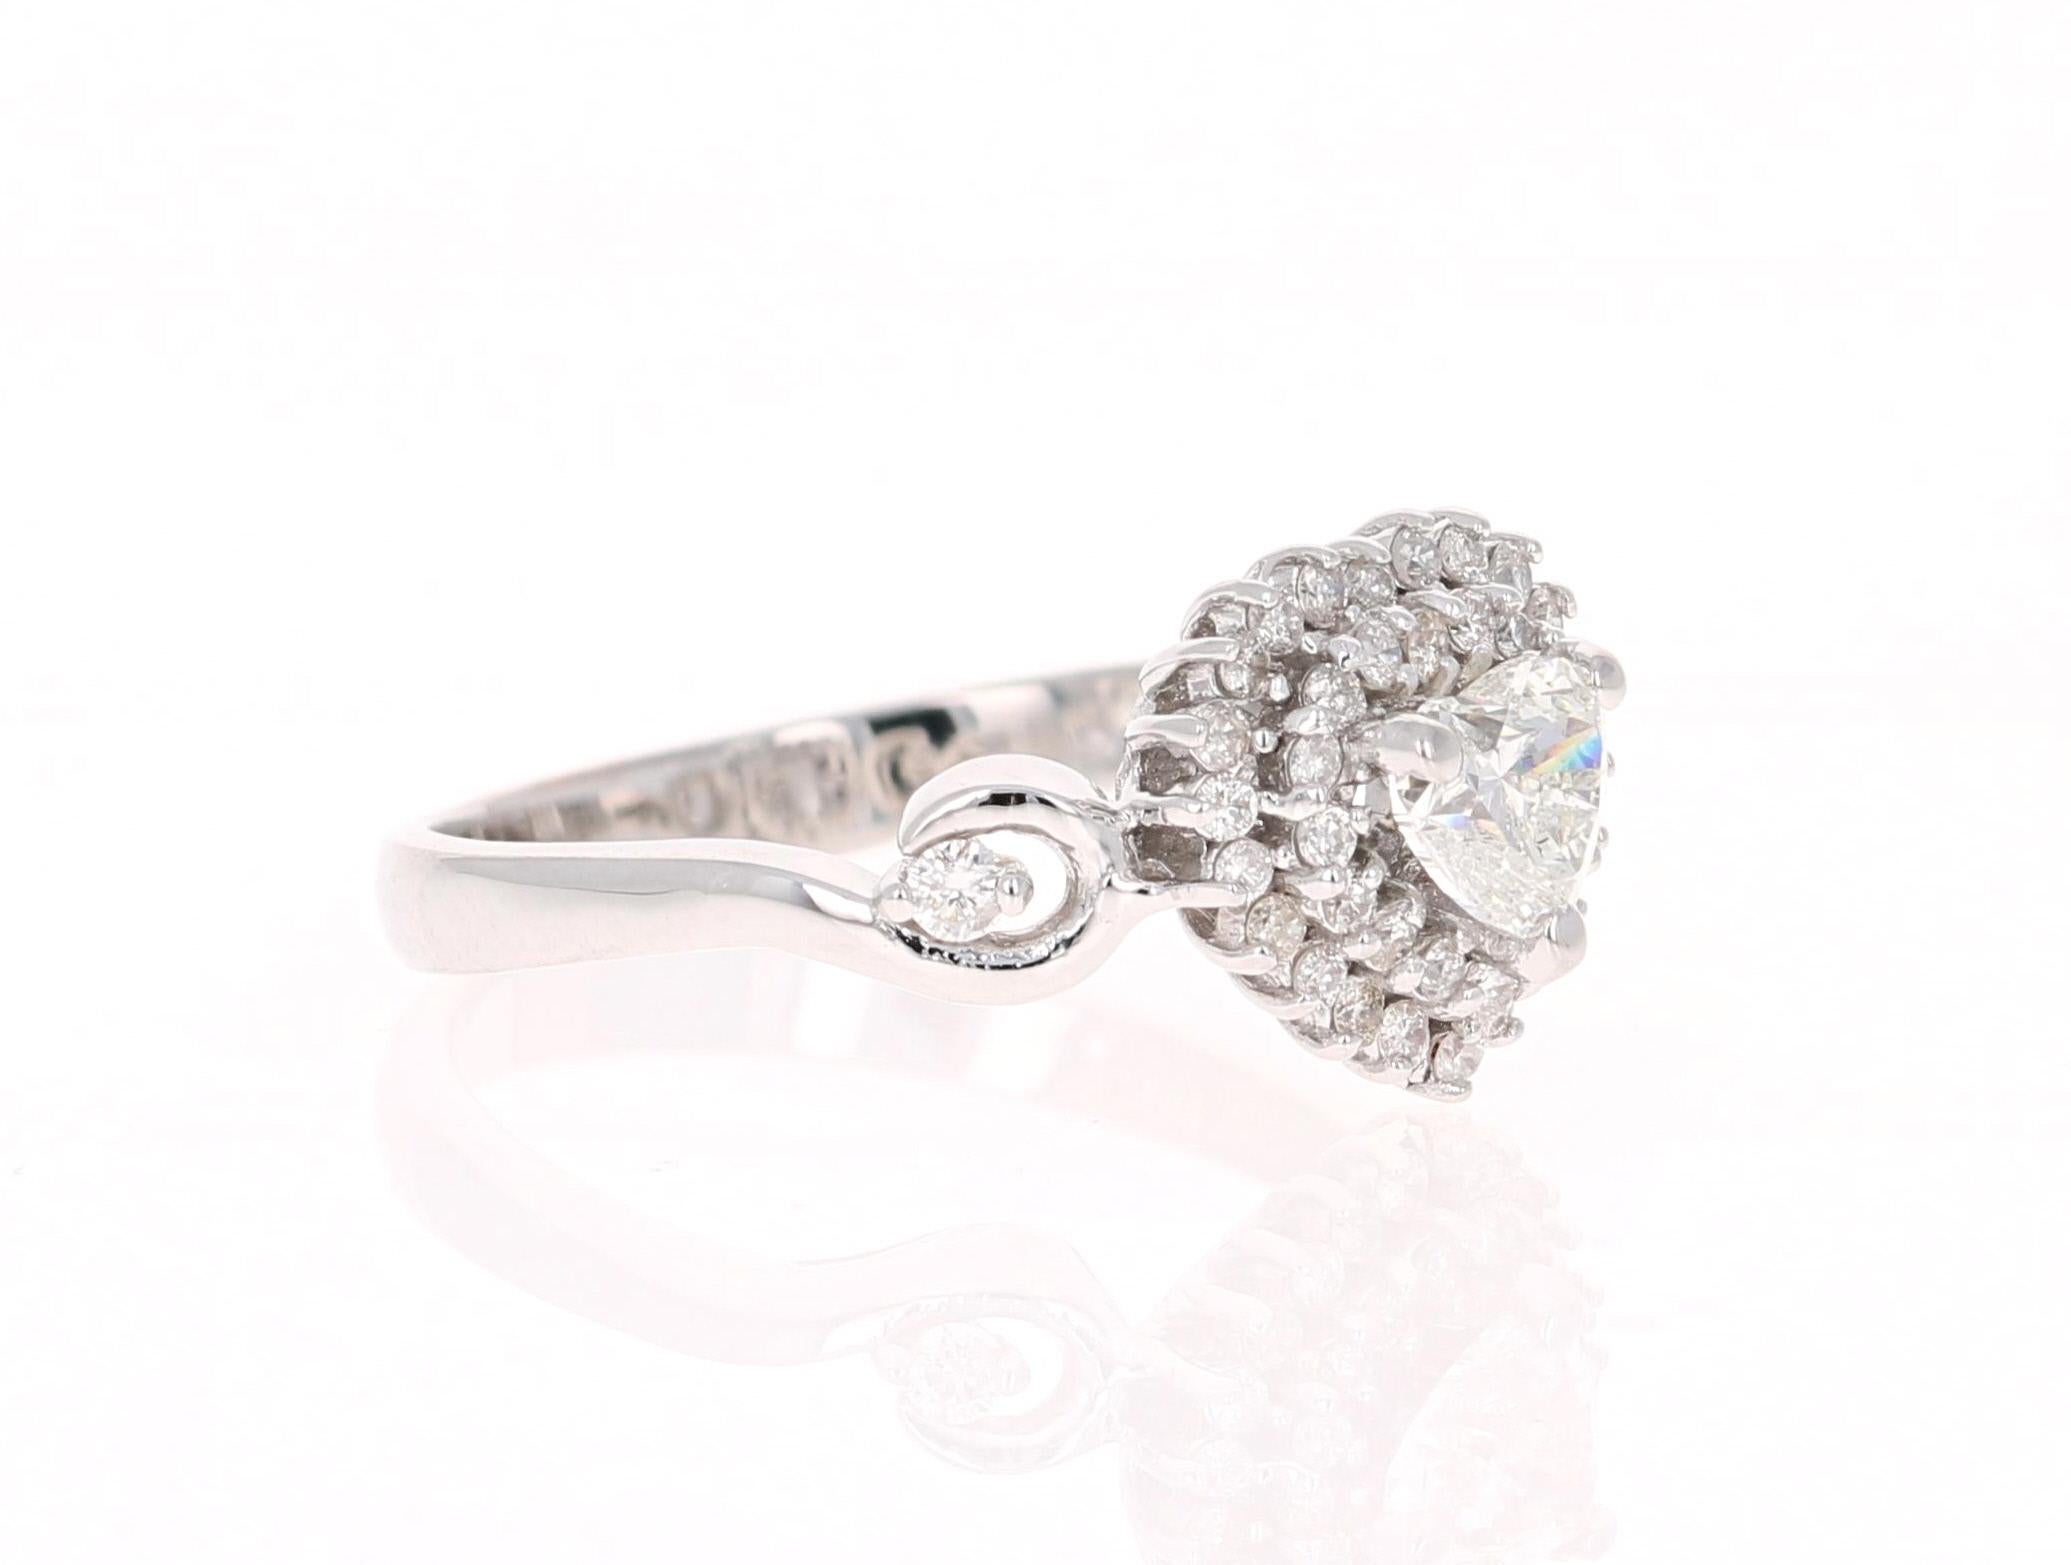 A Beautiful and Unique Engagement Ring with a Heart Cut Diamond. 

This unique ring has a heart cut diamond weighing 0.51 Carats and is surrounded by 41 Round Cut Diamonds that weigh 0.30 Carats.  (Clarity: SI, Color: F) 

It is beautifully set in